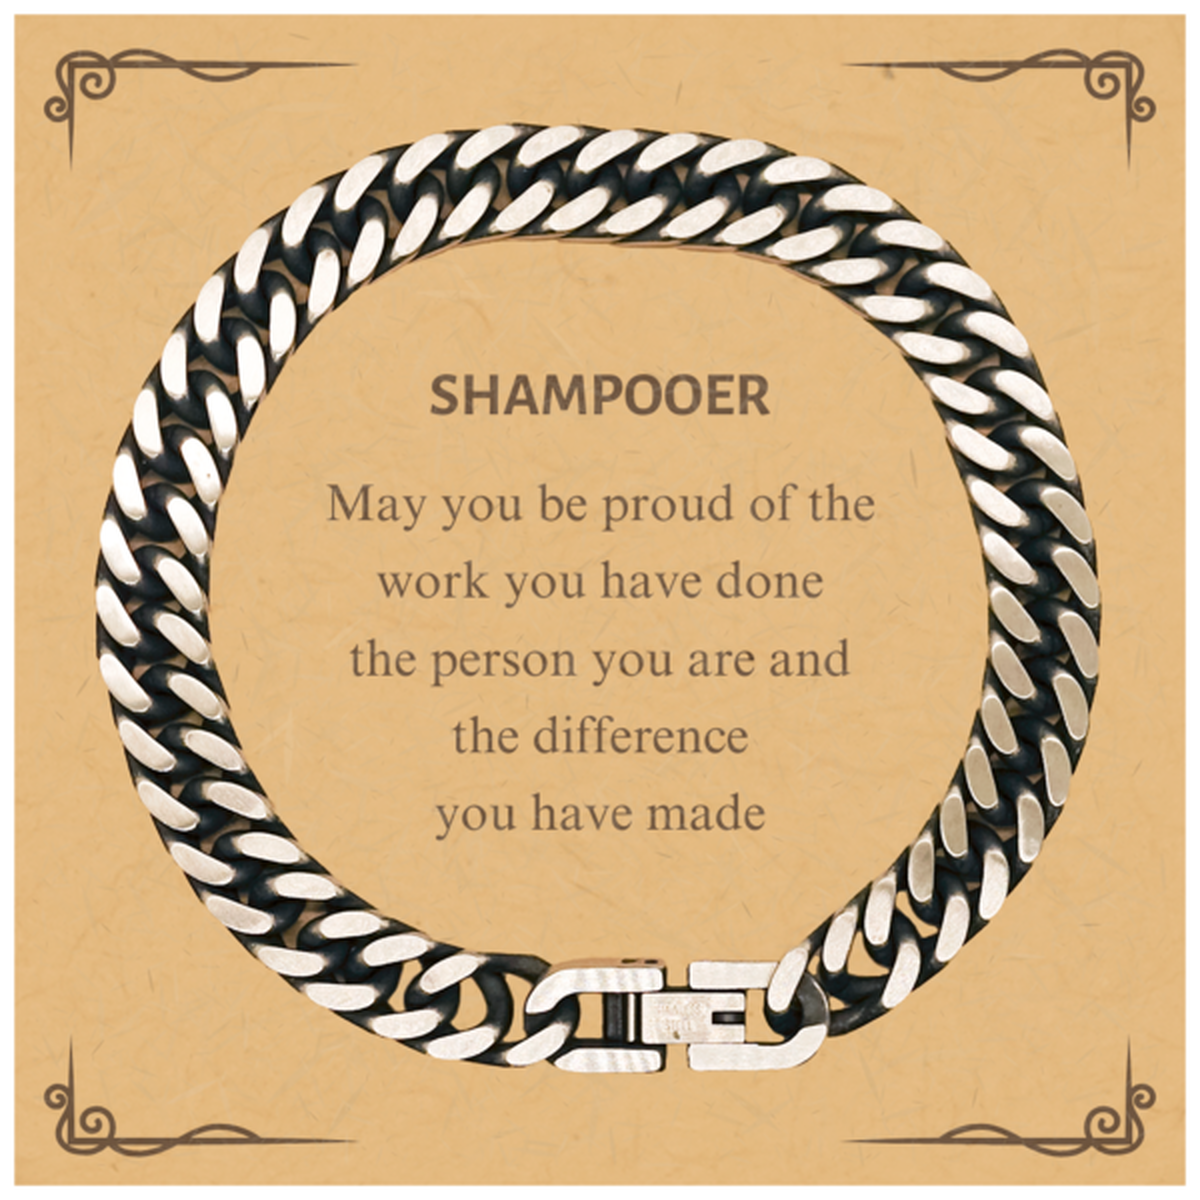 Shampooer May you be proud of the work you have done, Retirement Shampooer Cuban Link Chain Bracelet for Colleague Appreciation Gifts Amazing for Shampooer